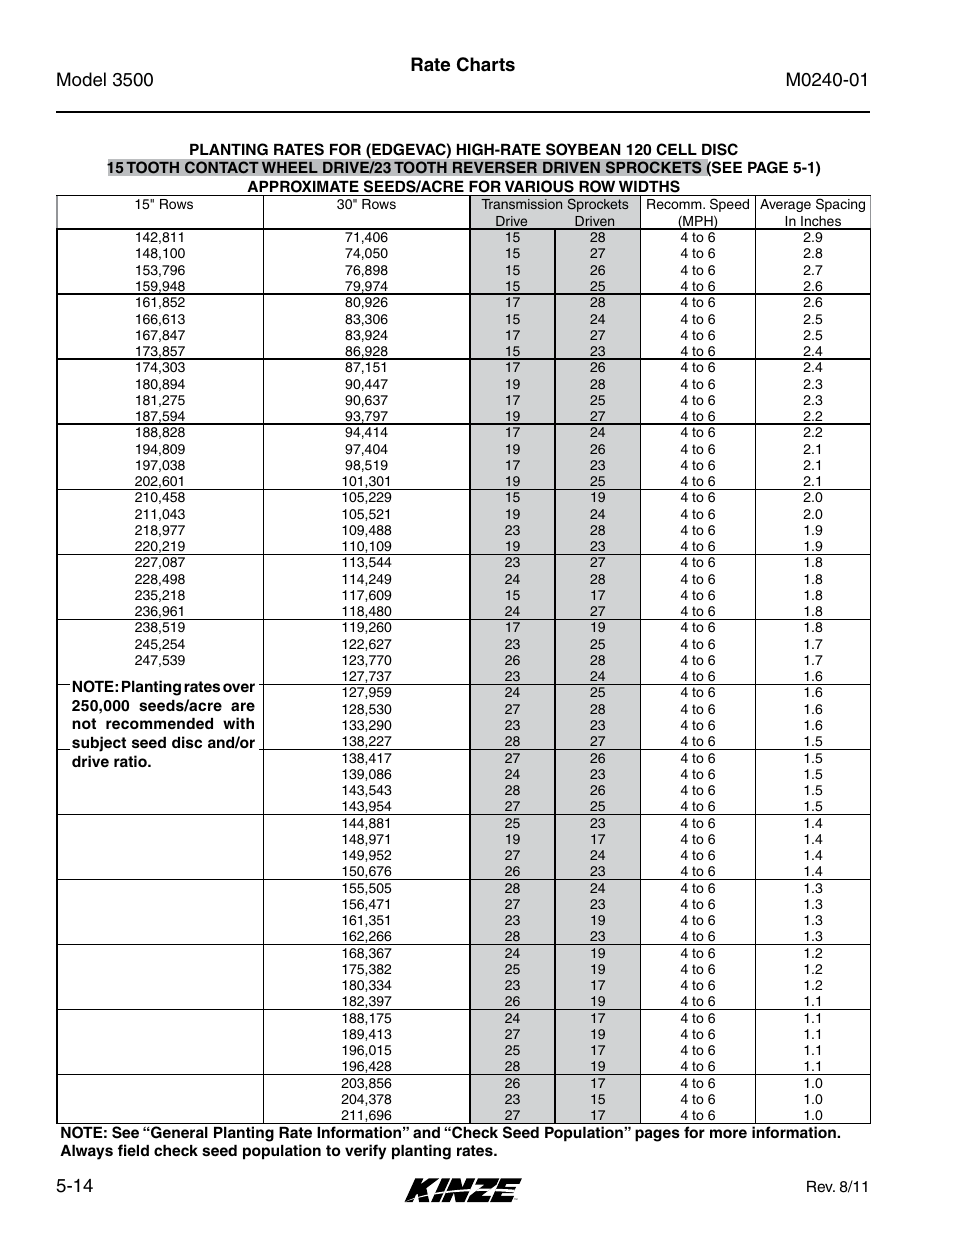 Rate charts | Kinze 3500 Lift and Rotate Planter Rev. 7/14 User Manual | Page 84 / 140